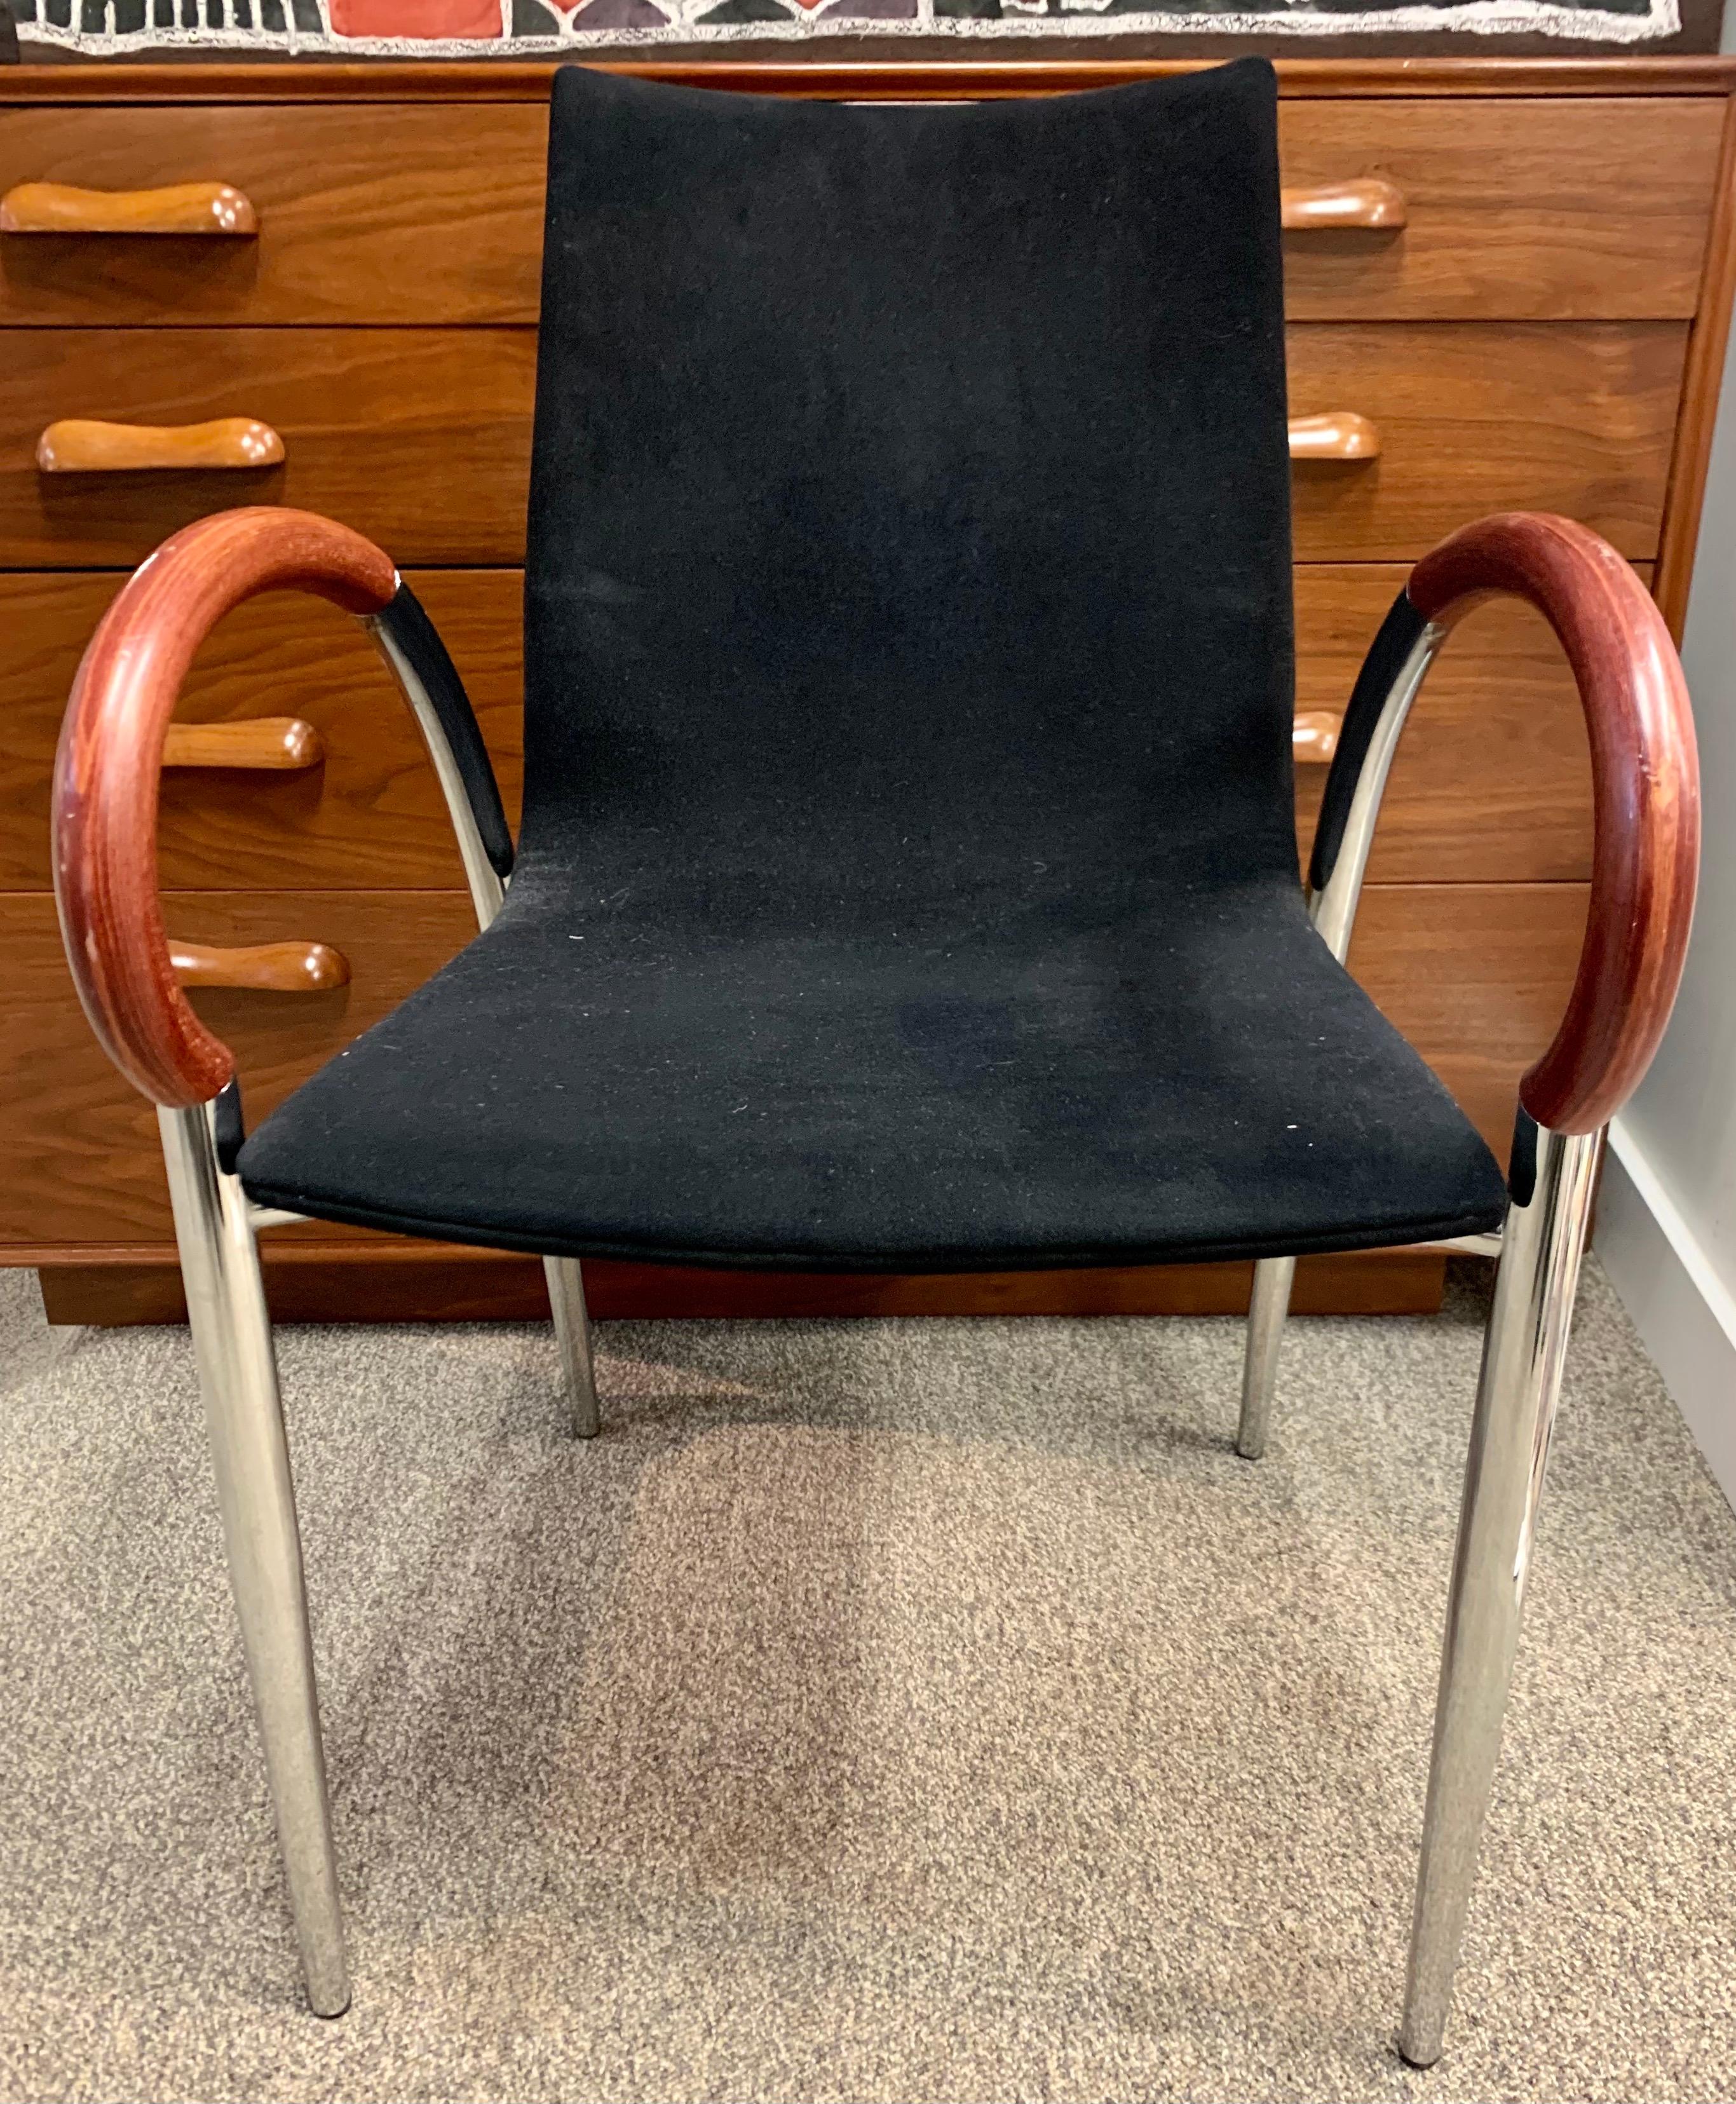 Elegant and unusual pair of Mid-Century Modern dining chairs where the arms are made of what looks like rosewood. The color of seat is black. Made in Italy. Now, more than ever, home is where the heart is.
The fabric looks and feels like suede but